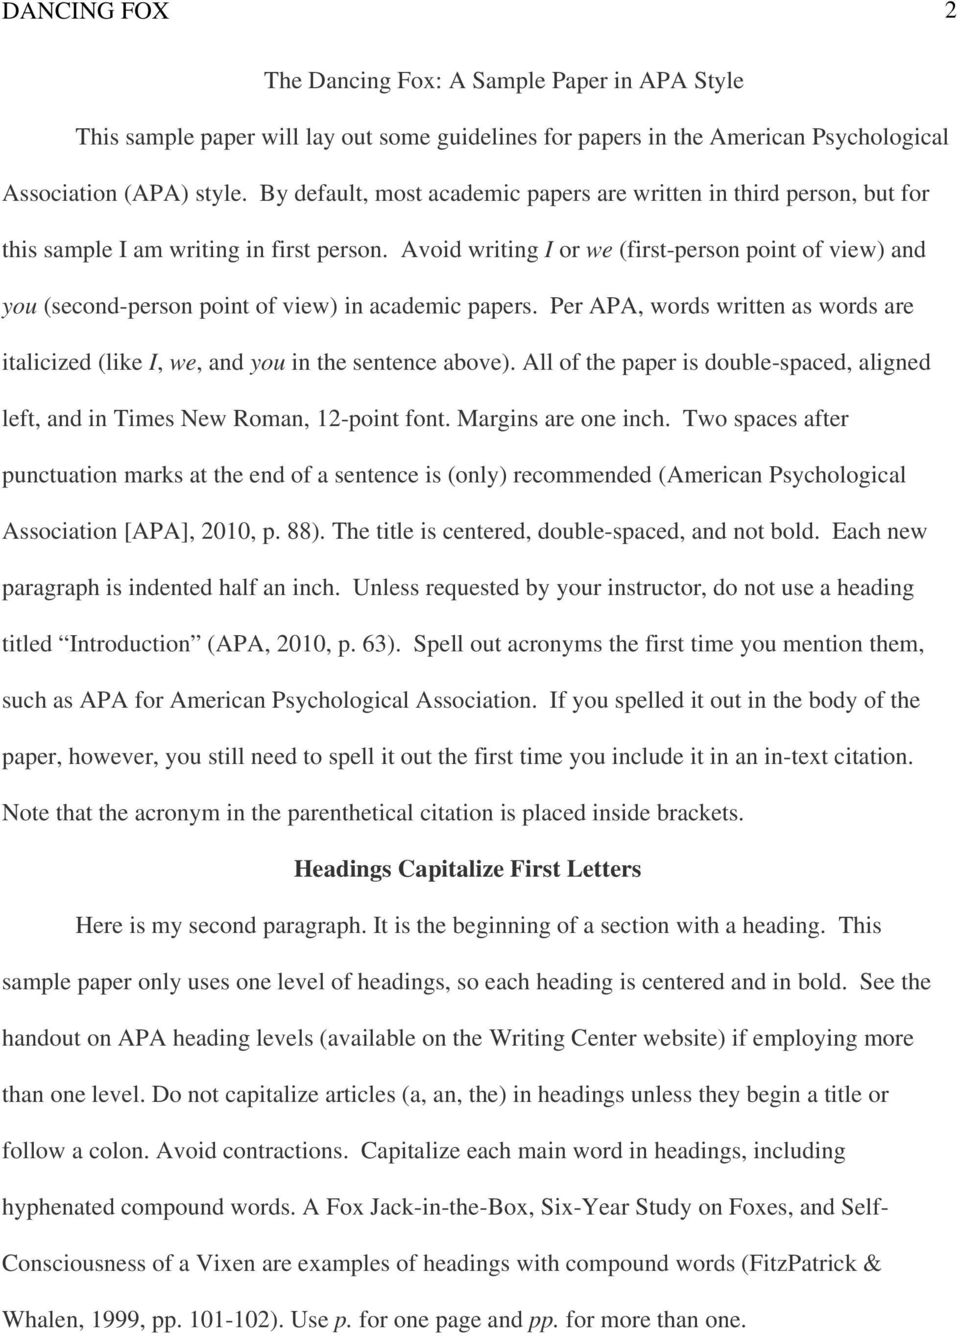 is an apa paper double spaced